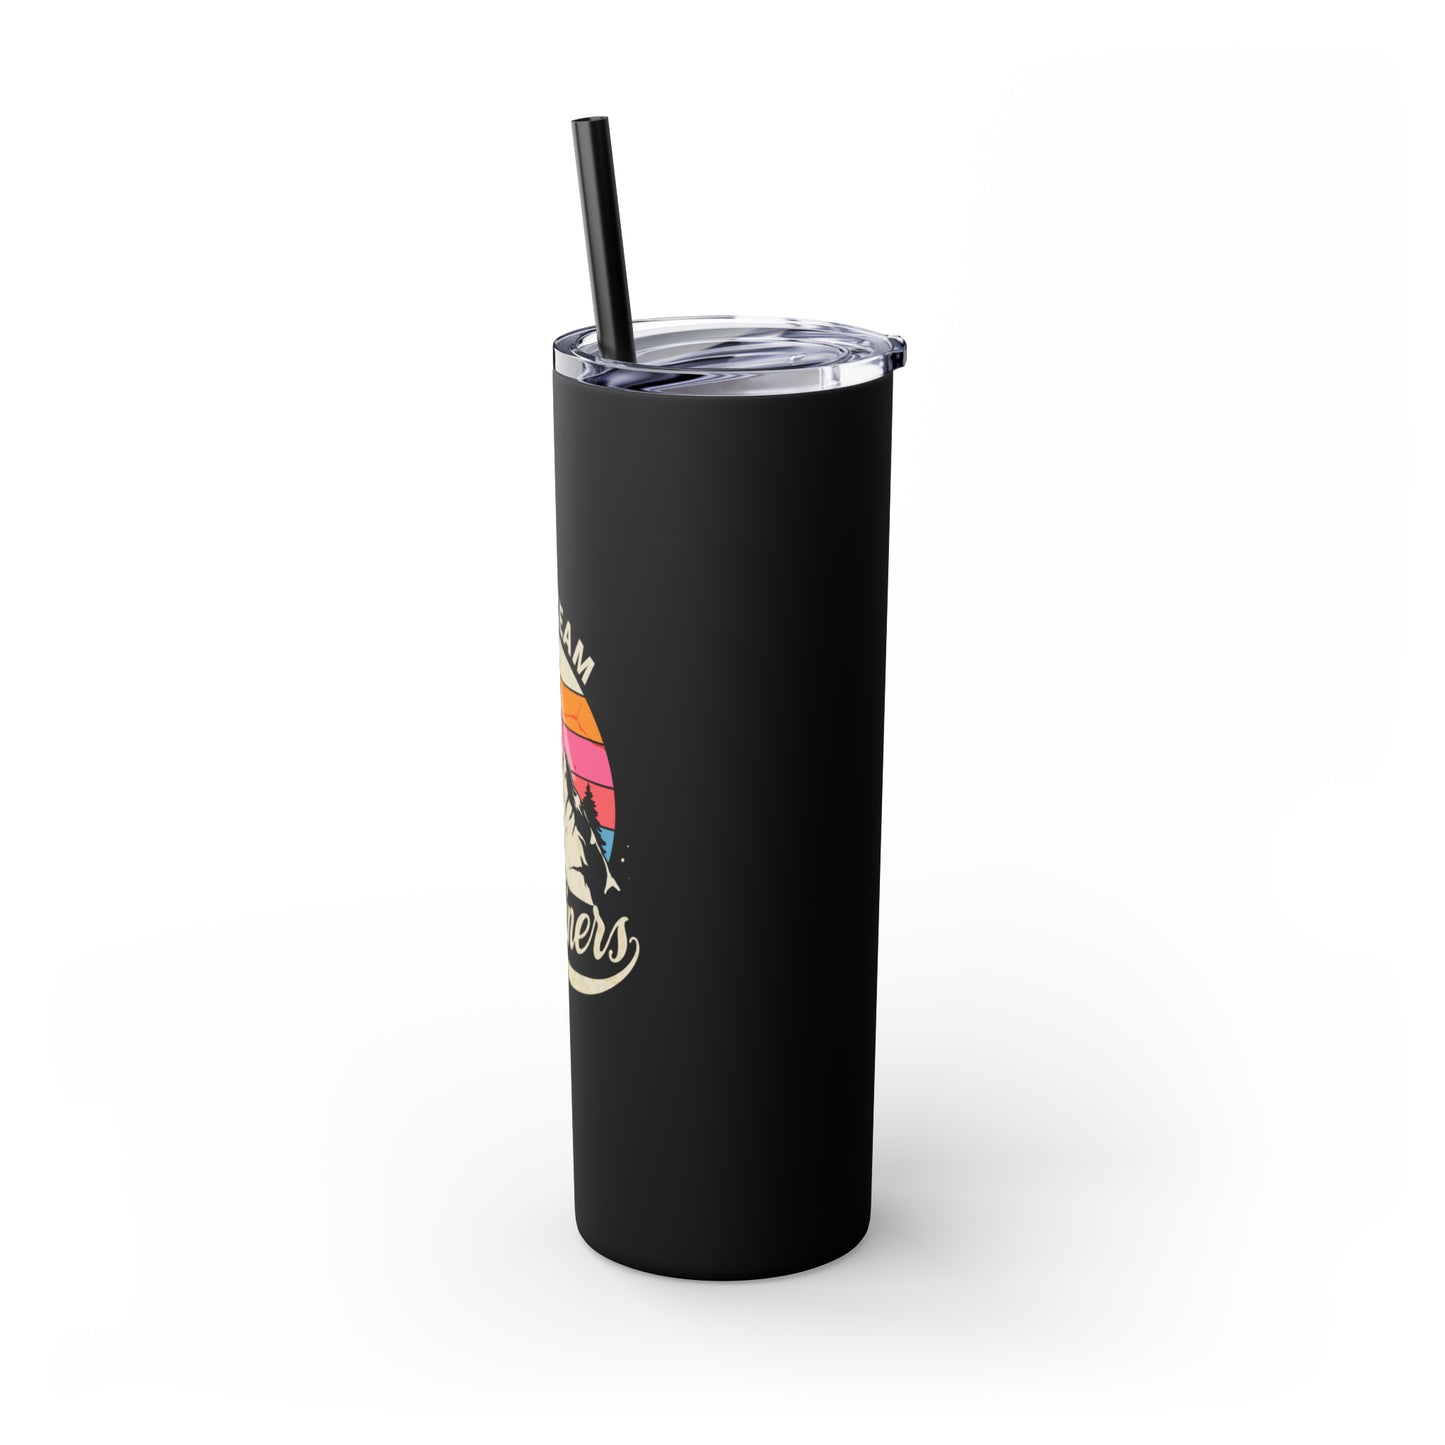 3K team collection - Skinny Tumbler with Straw